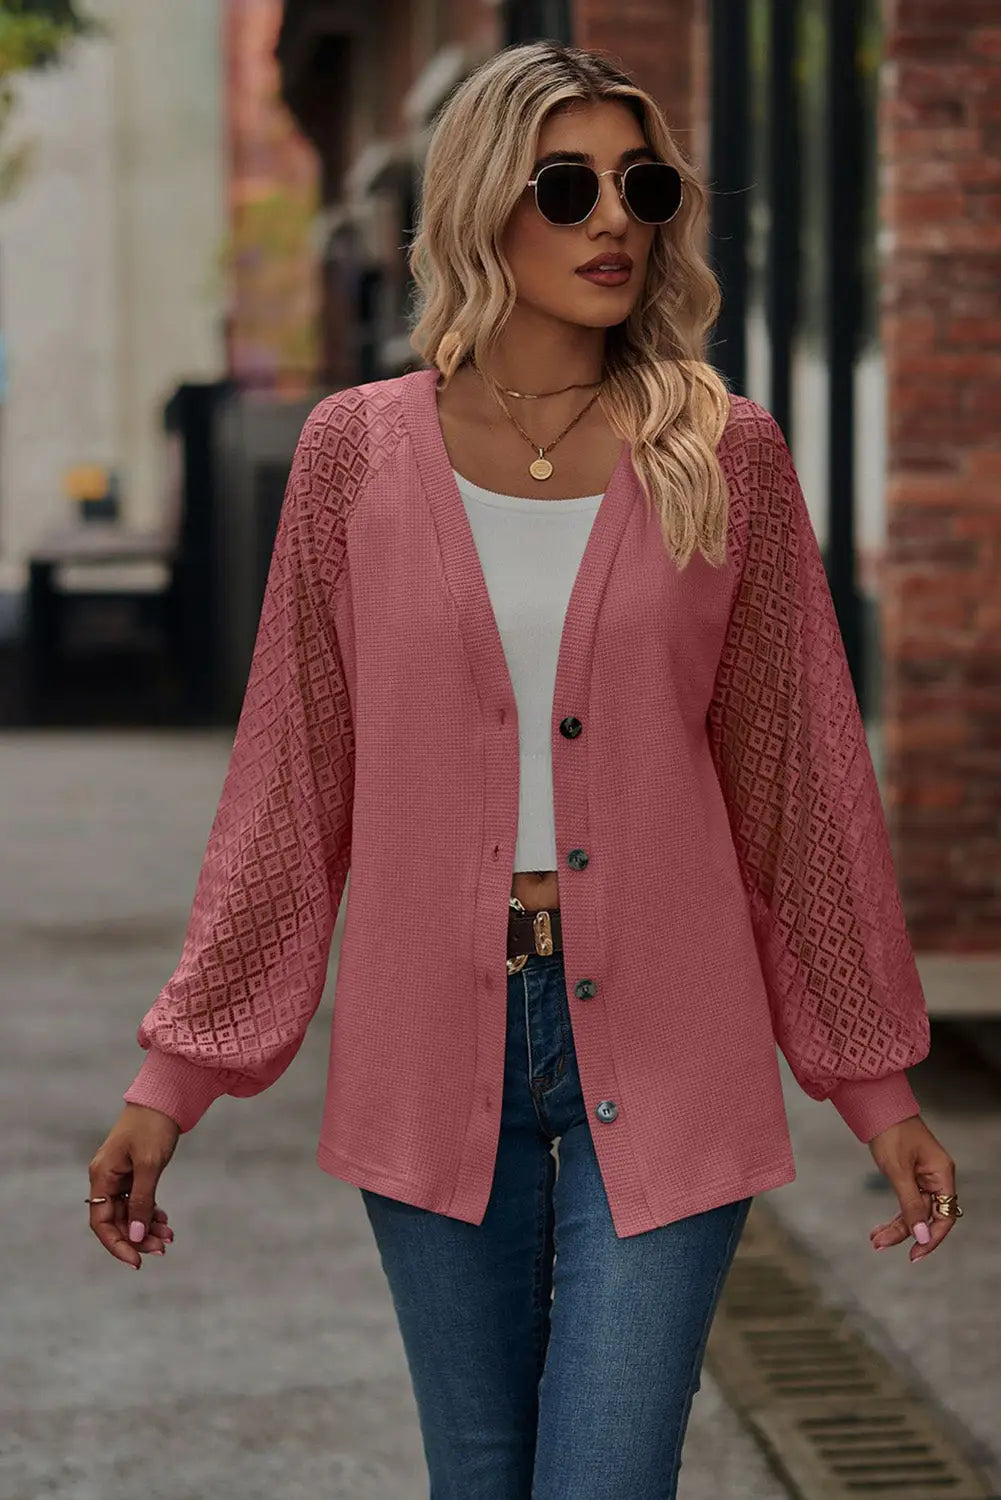 Waffled knit lace long sleeve buttoned cardigan - sweaters & cardigans